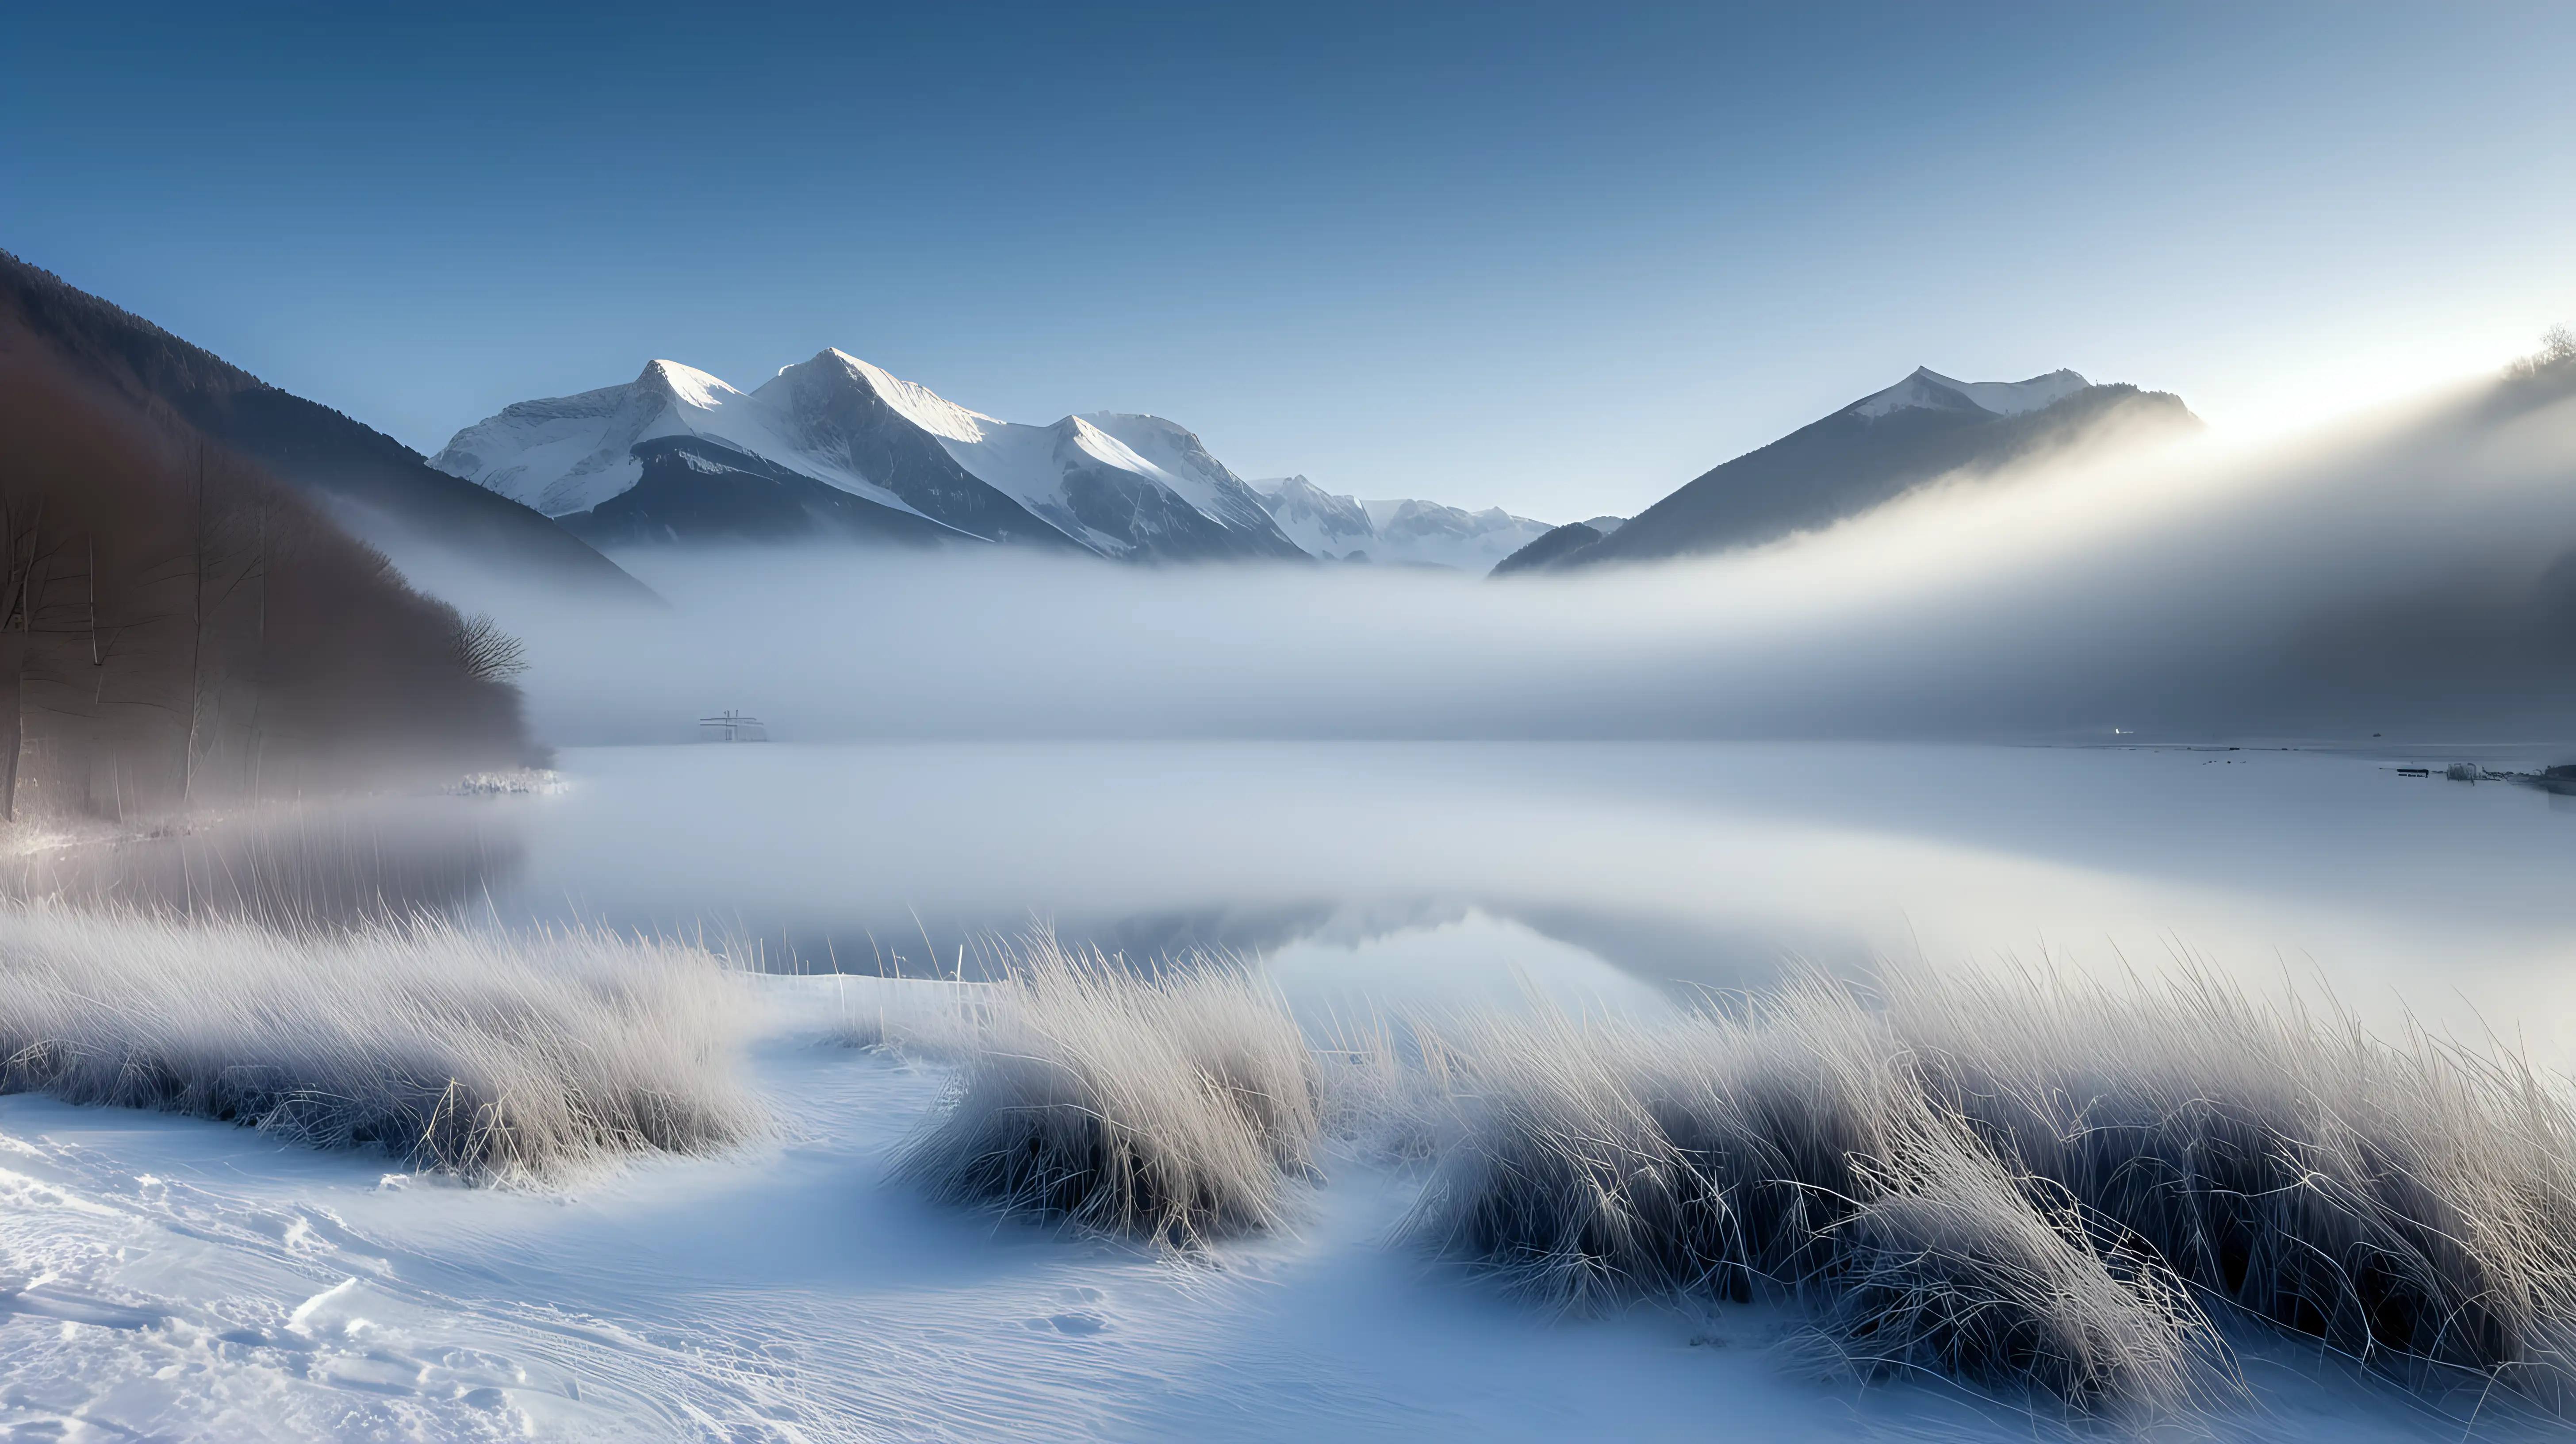 Majestic Winter Landscape with Frozen Lake Snowy Mountains and Misty Meadows